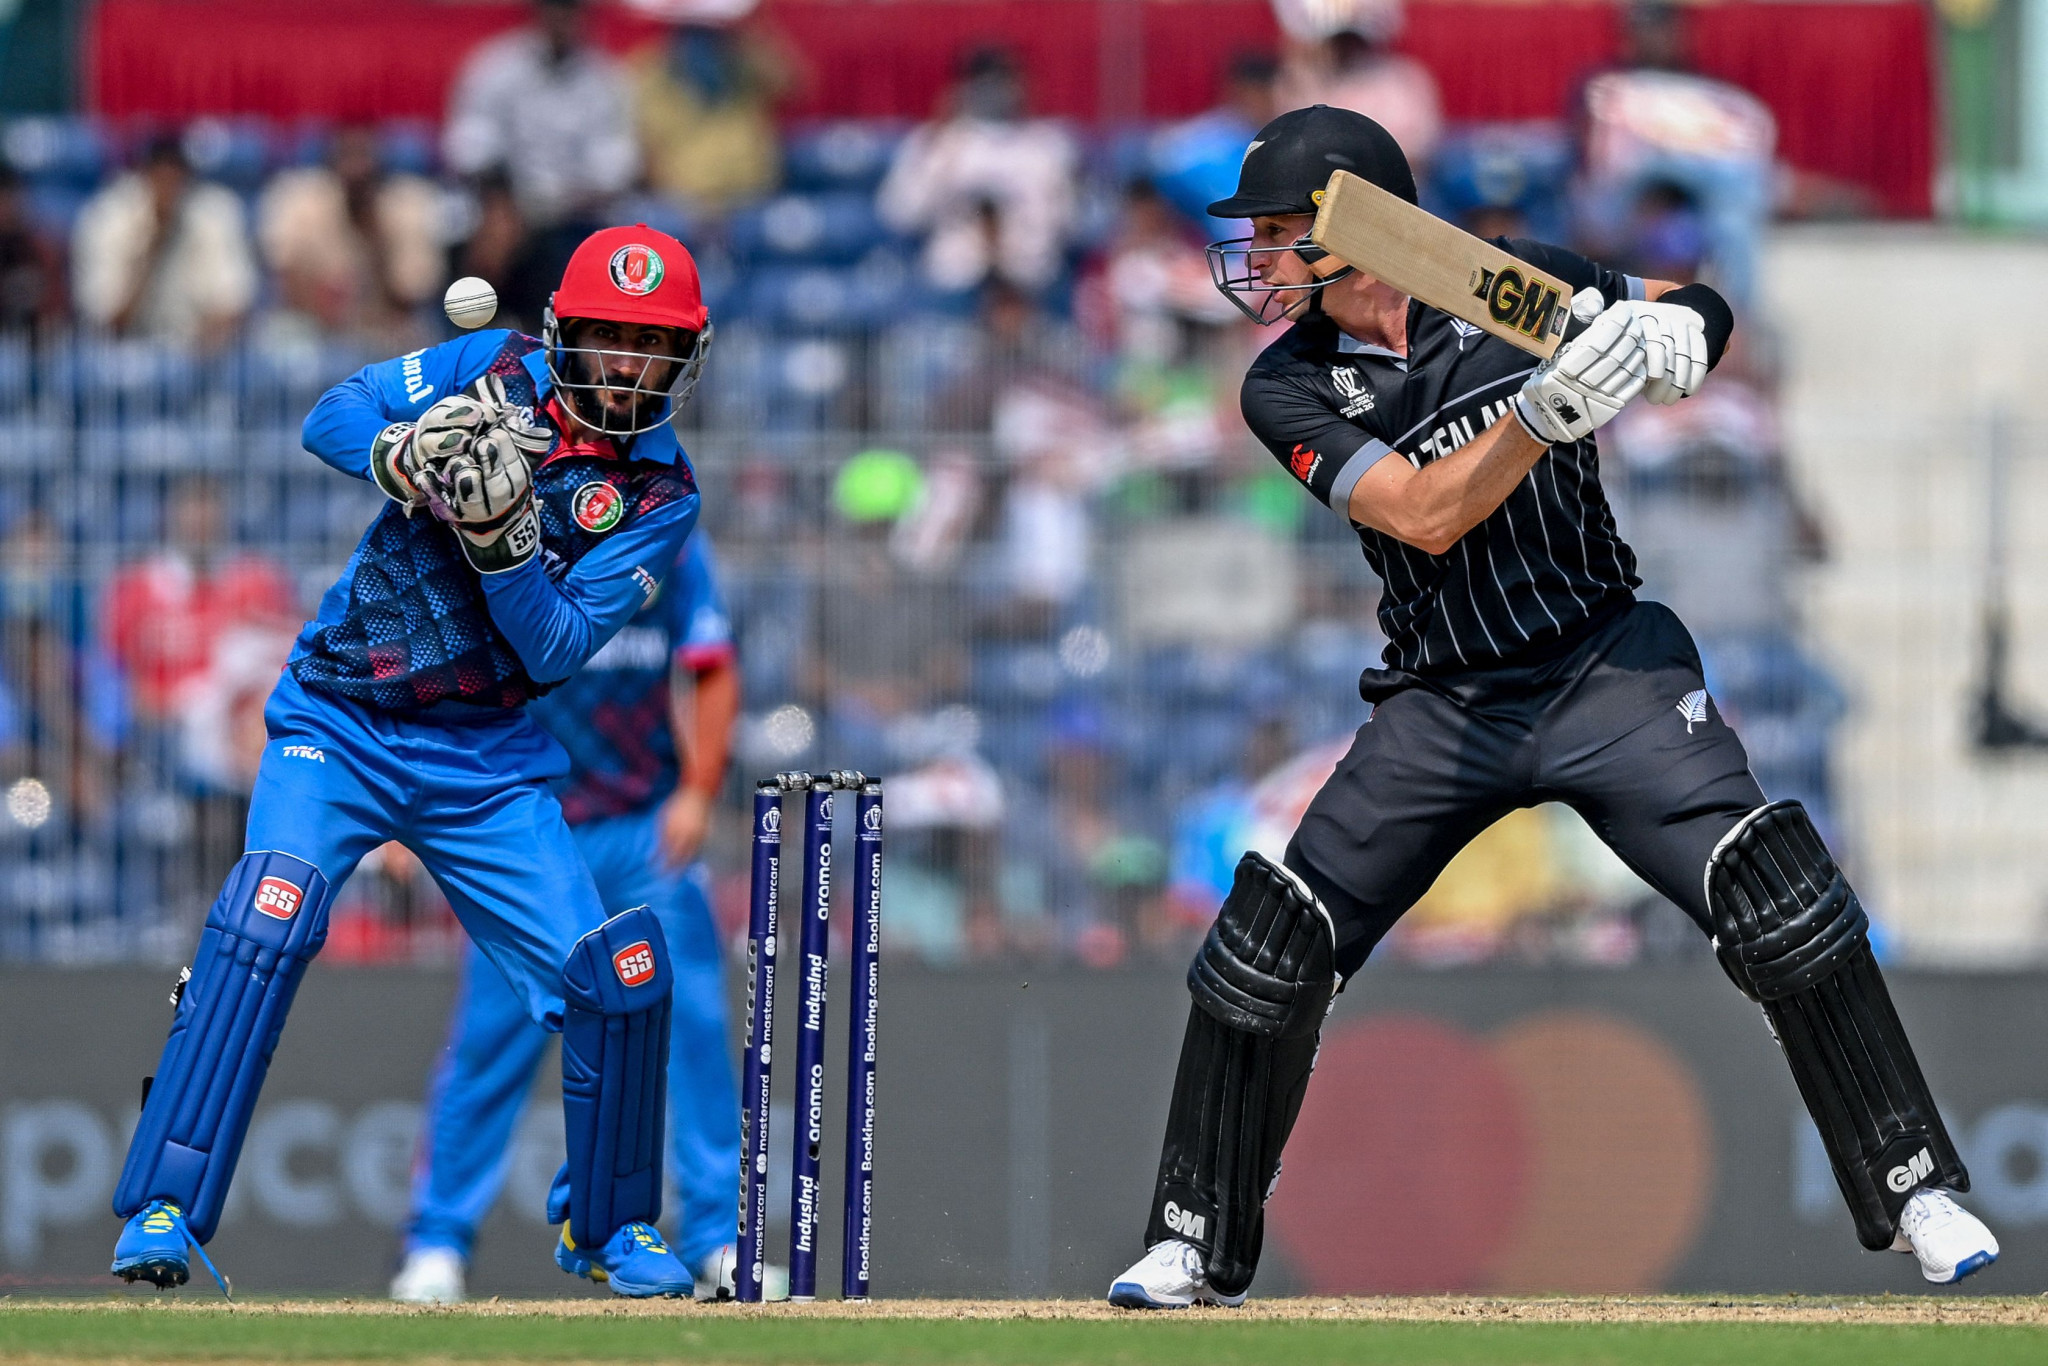 New Zealand kept their Cricket World Cup win streak alive with victory against Afghanistan ©Getty Images